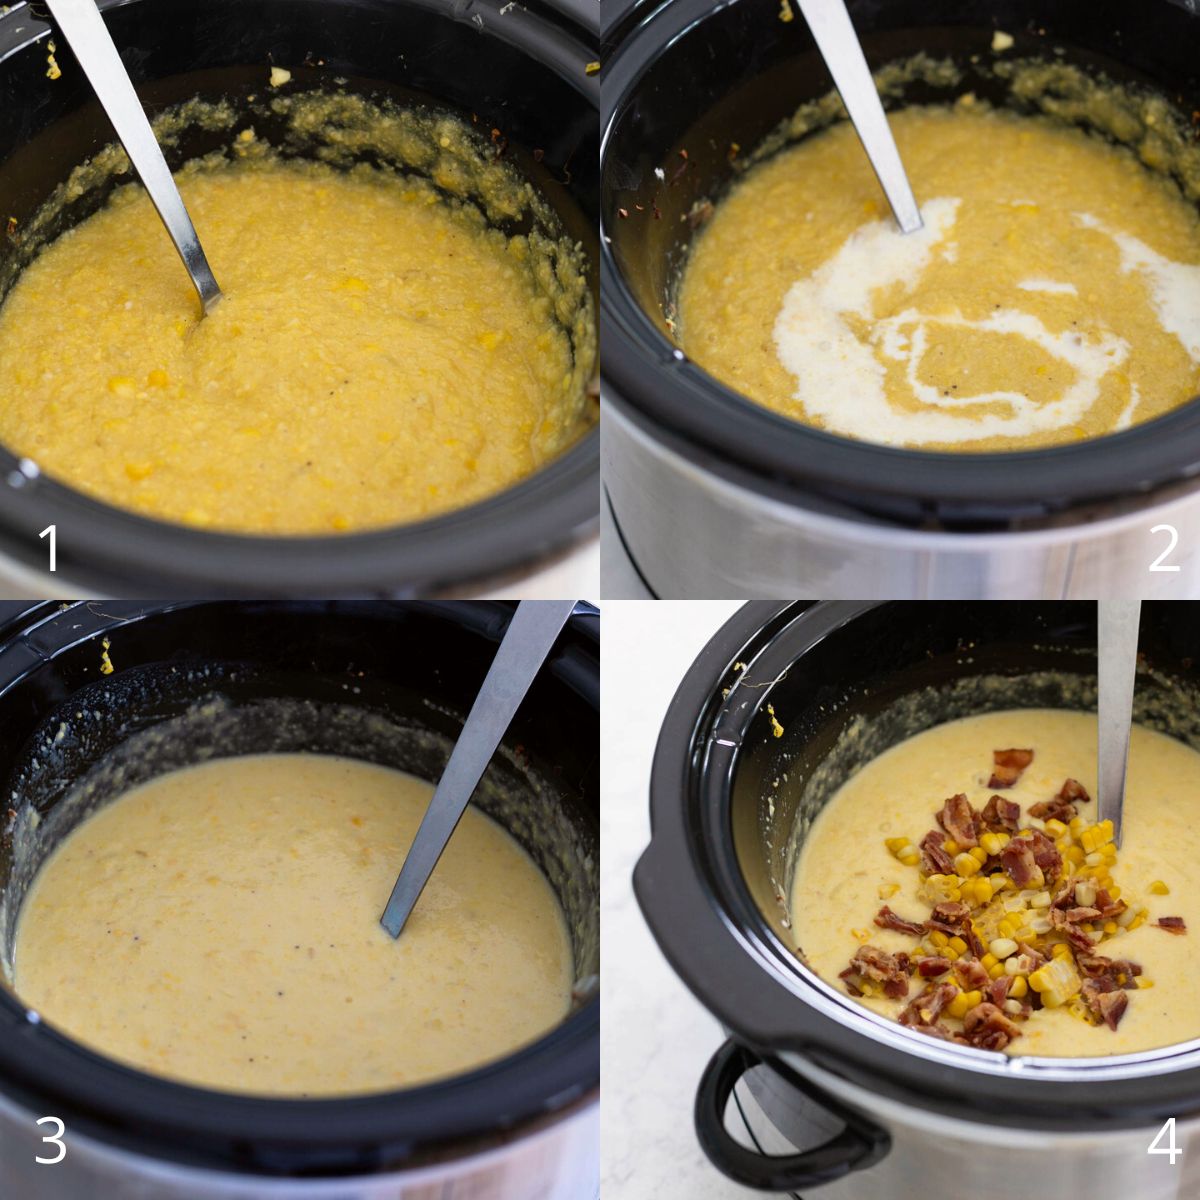 The step by step photos show how to puree the chowder and add the cream.